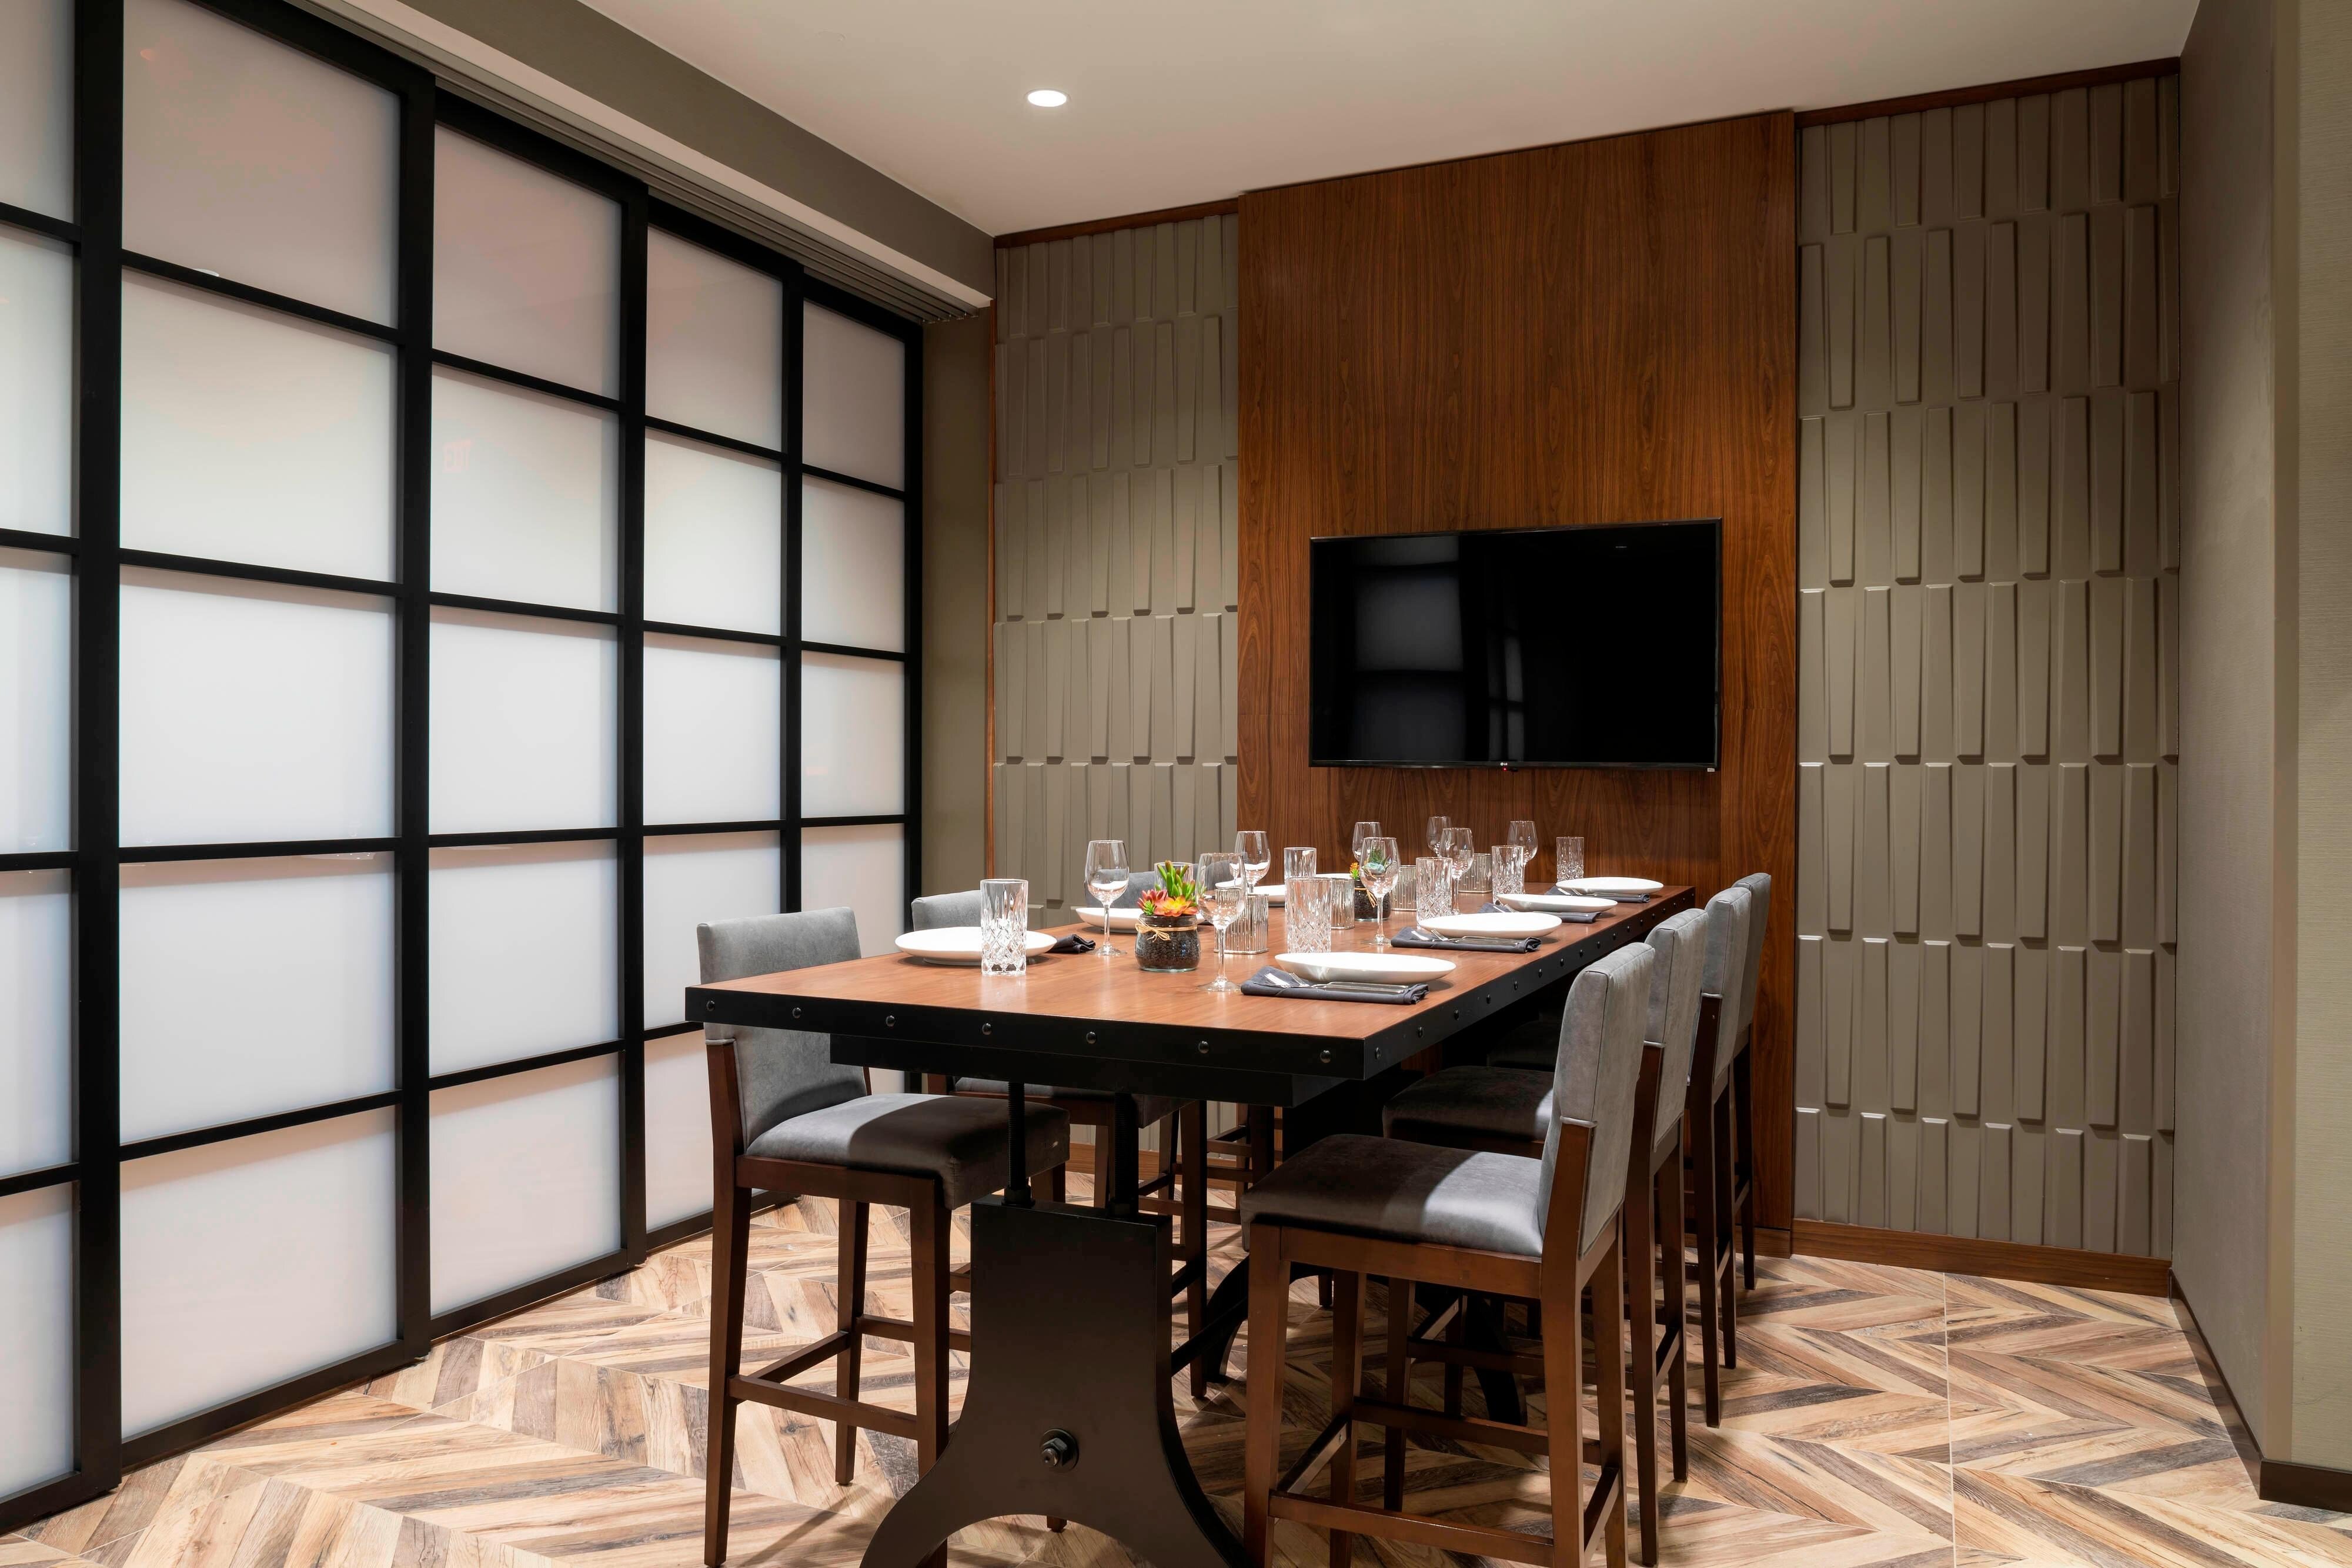 Central Rail Kitchen & Bar - Private Dining Room